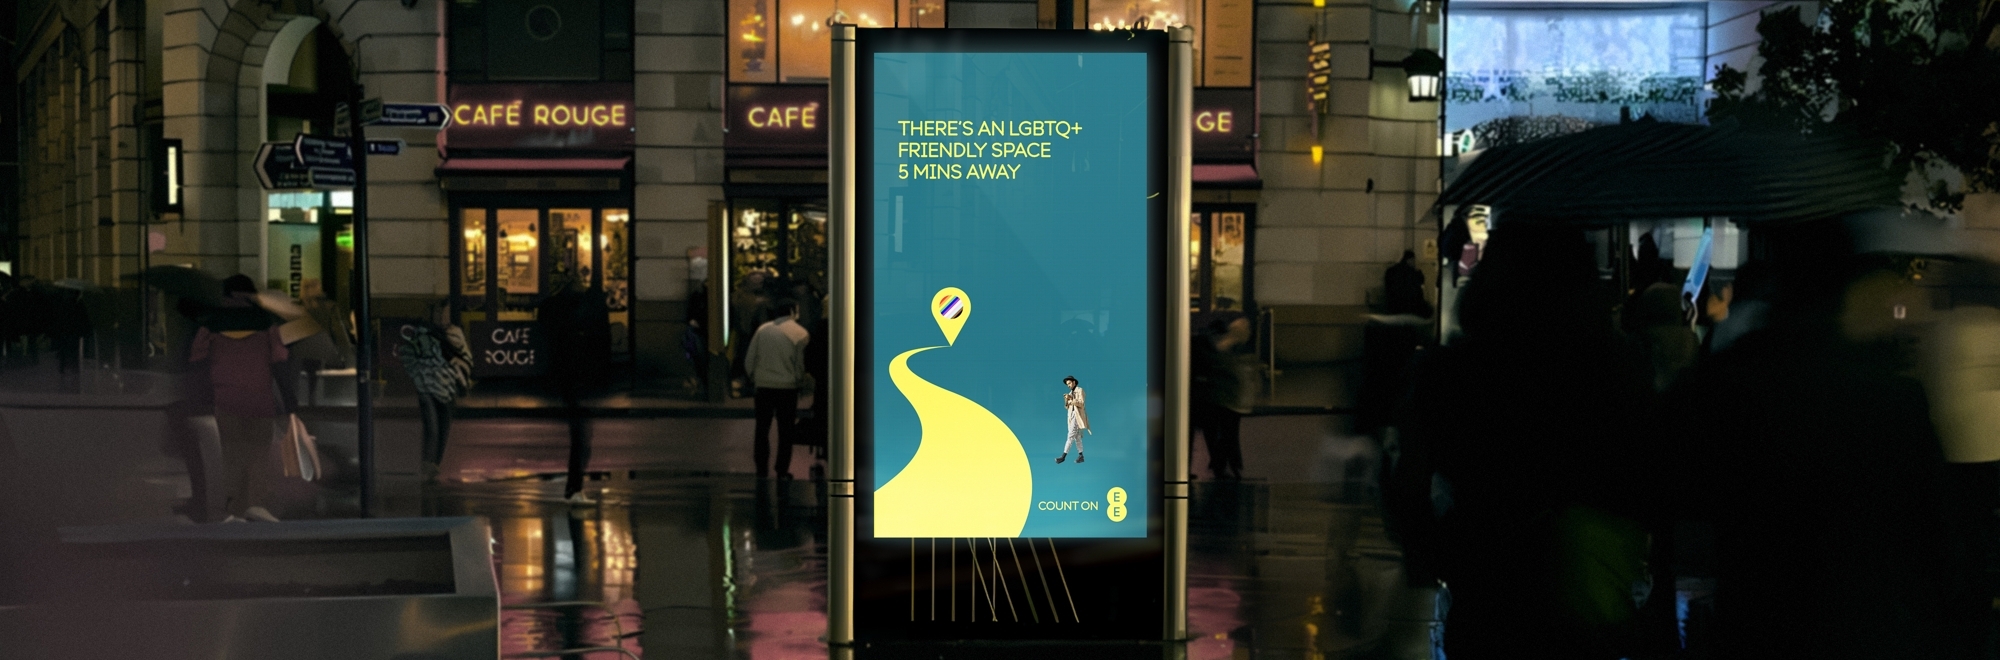 EE launches new digital billboards to help Manchester stay connected at night